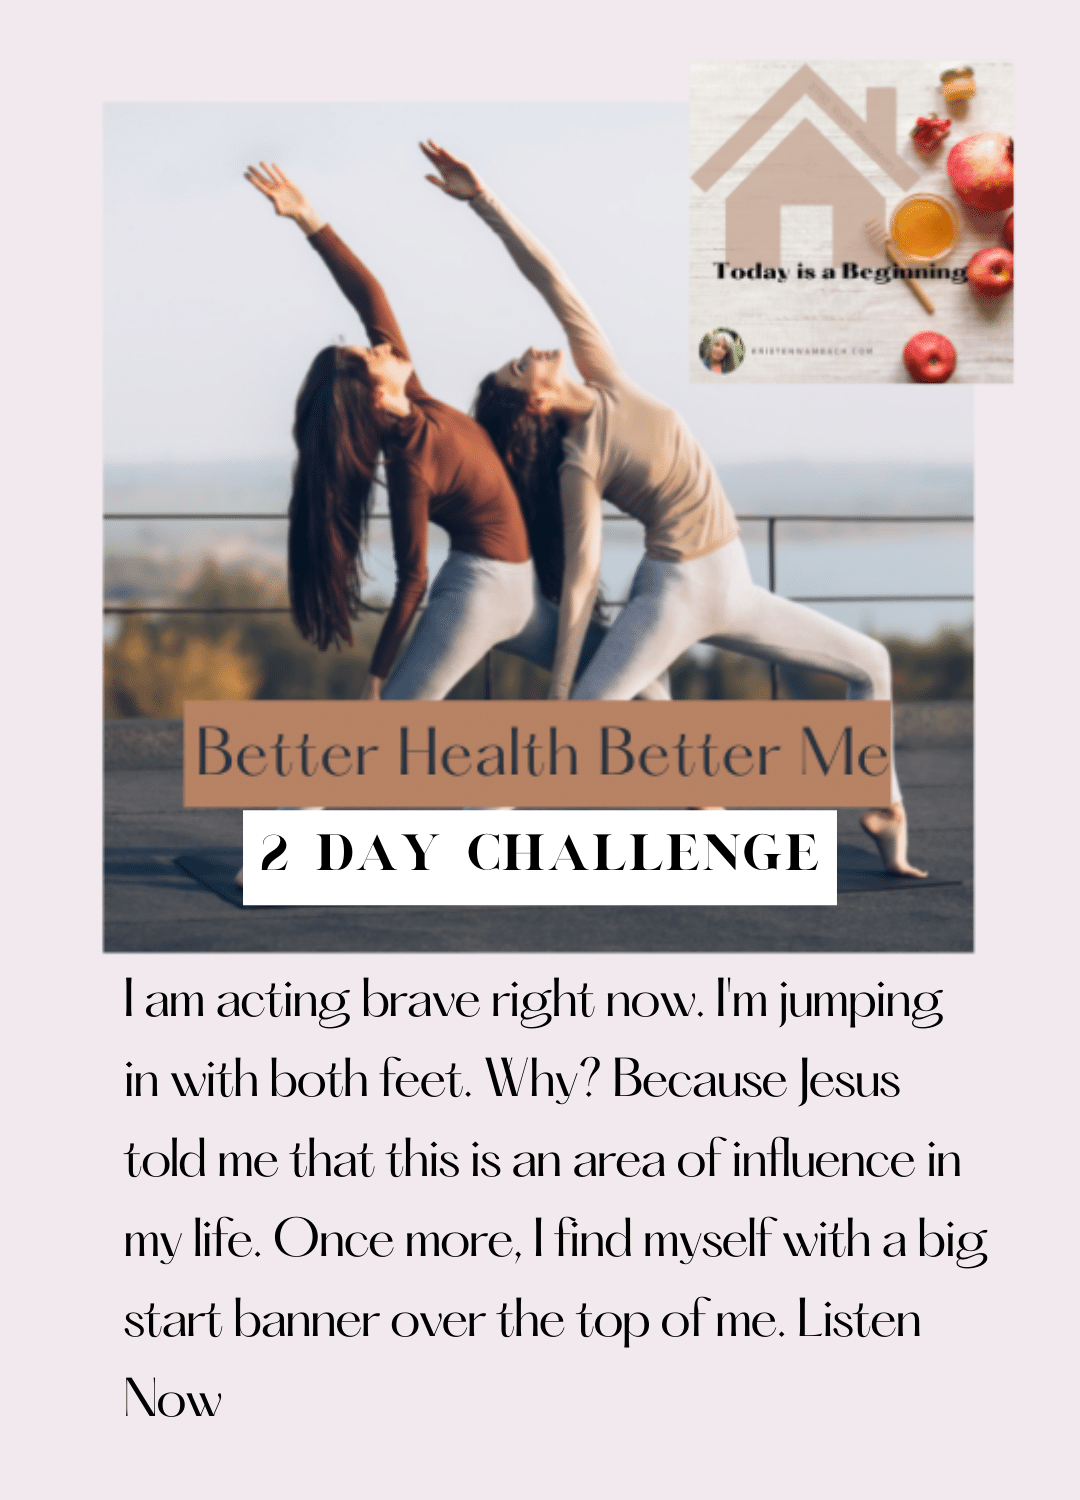 Better Health Better Me. Interviewing Jesus Podcast